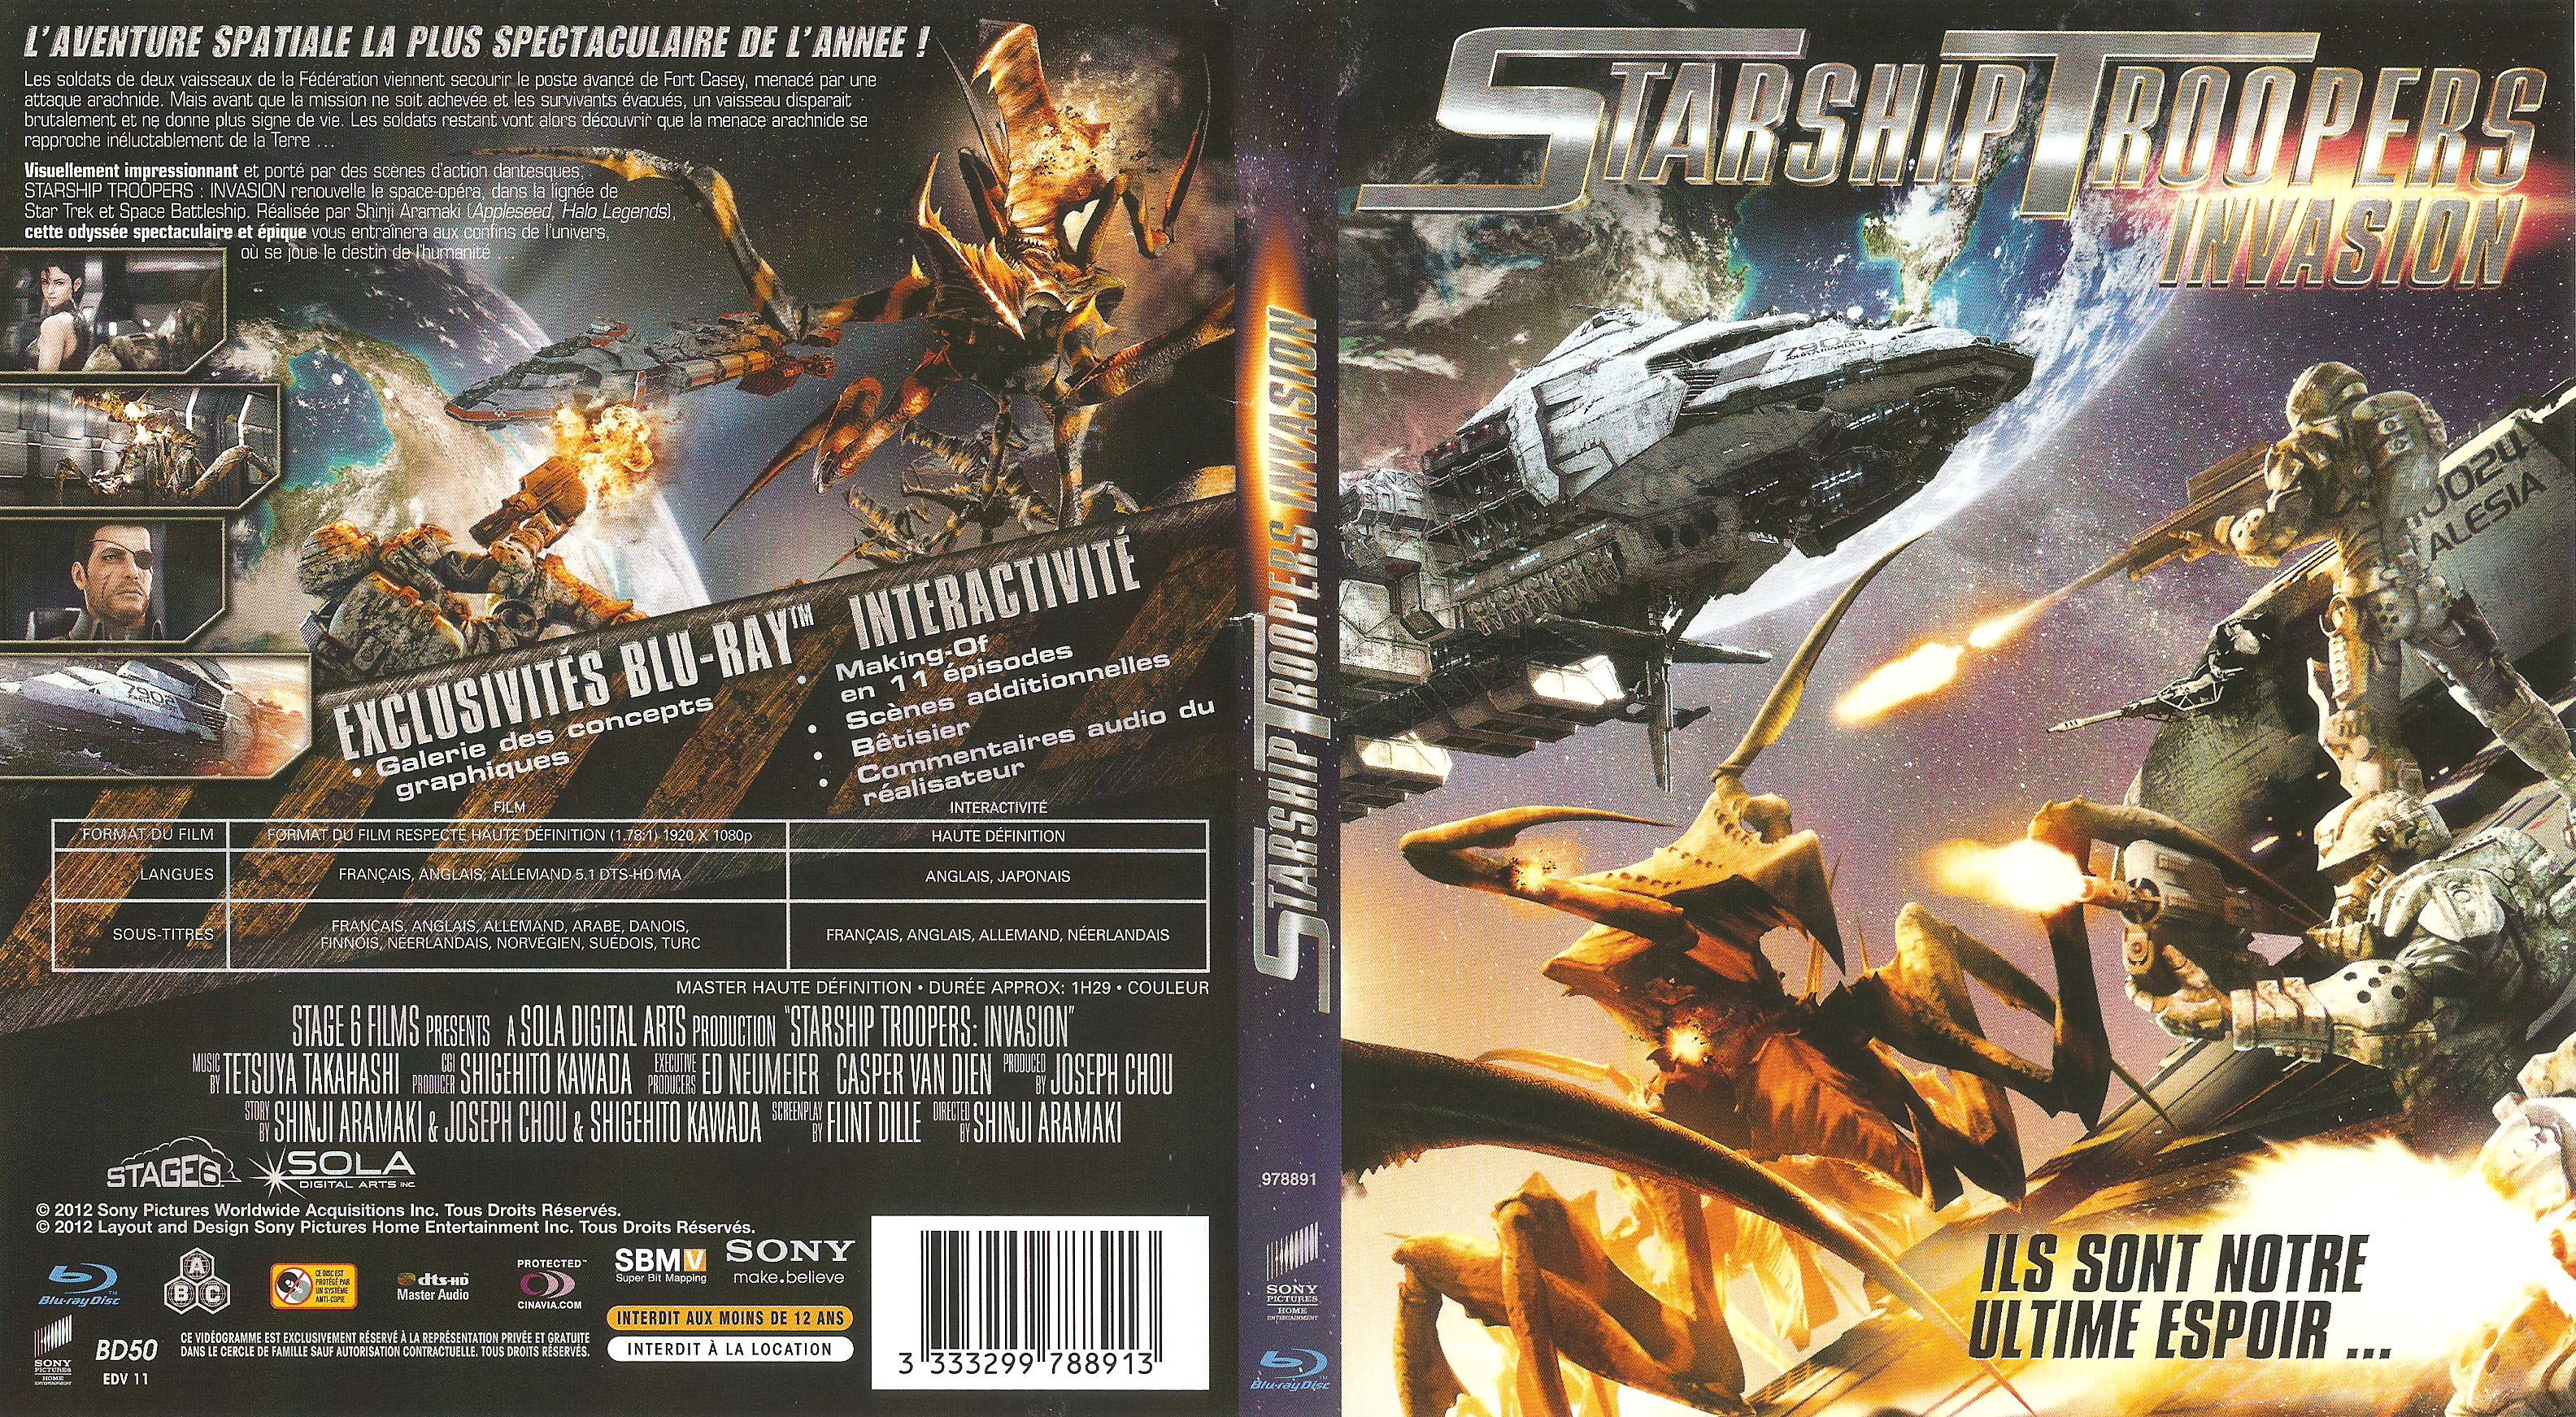 Jaquette DVD Starship Troopers Invasion (BLU-RAY)